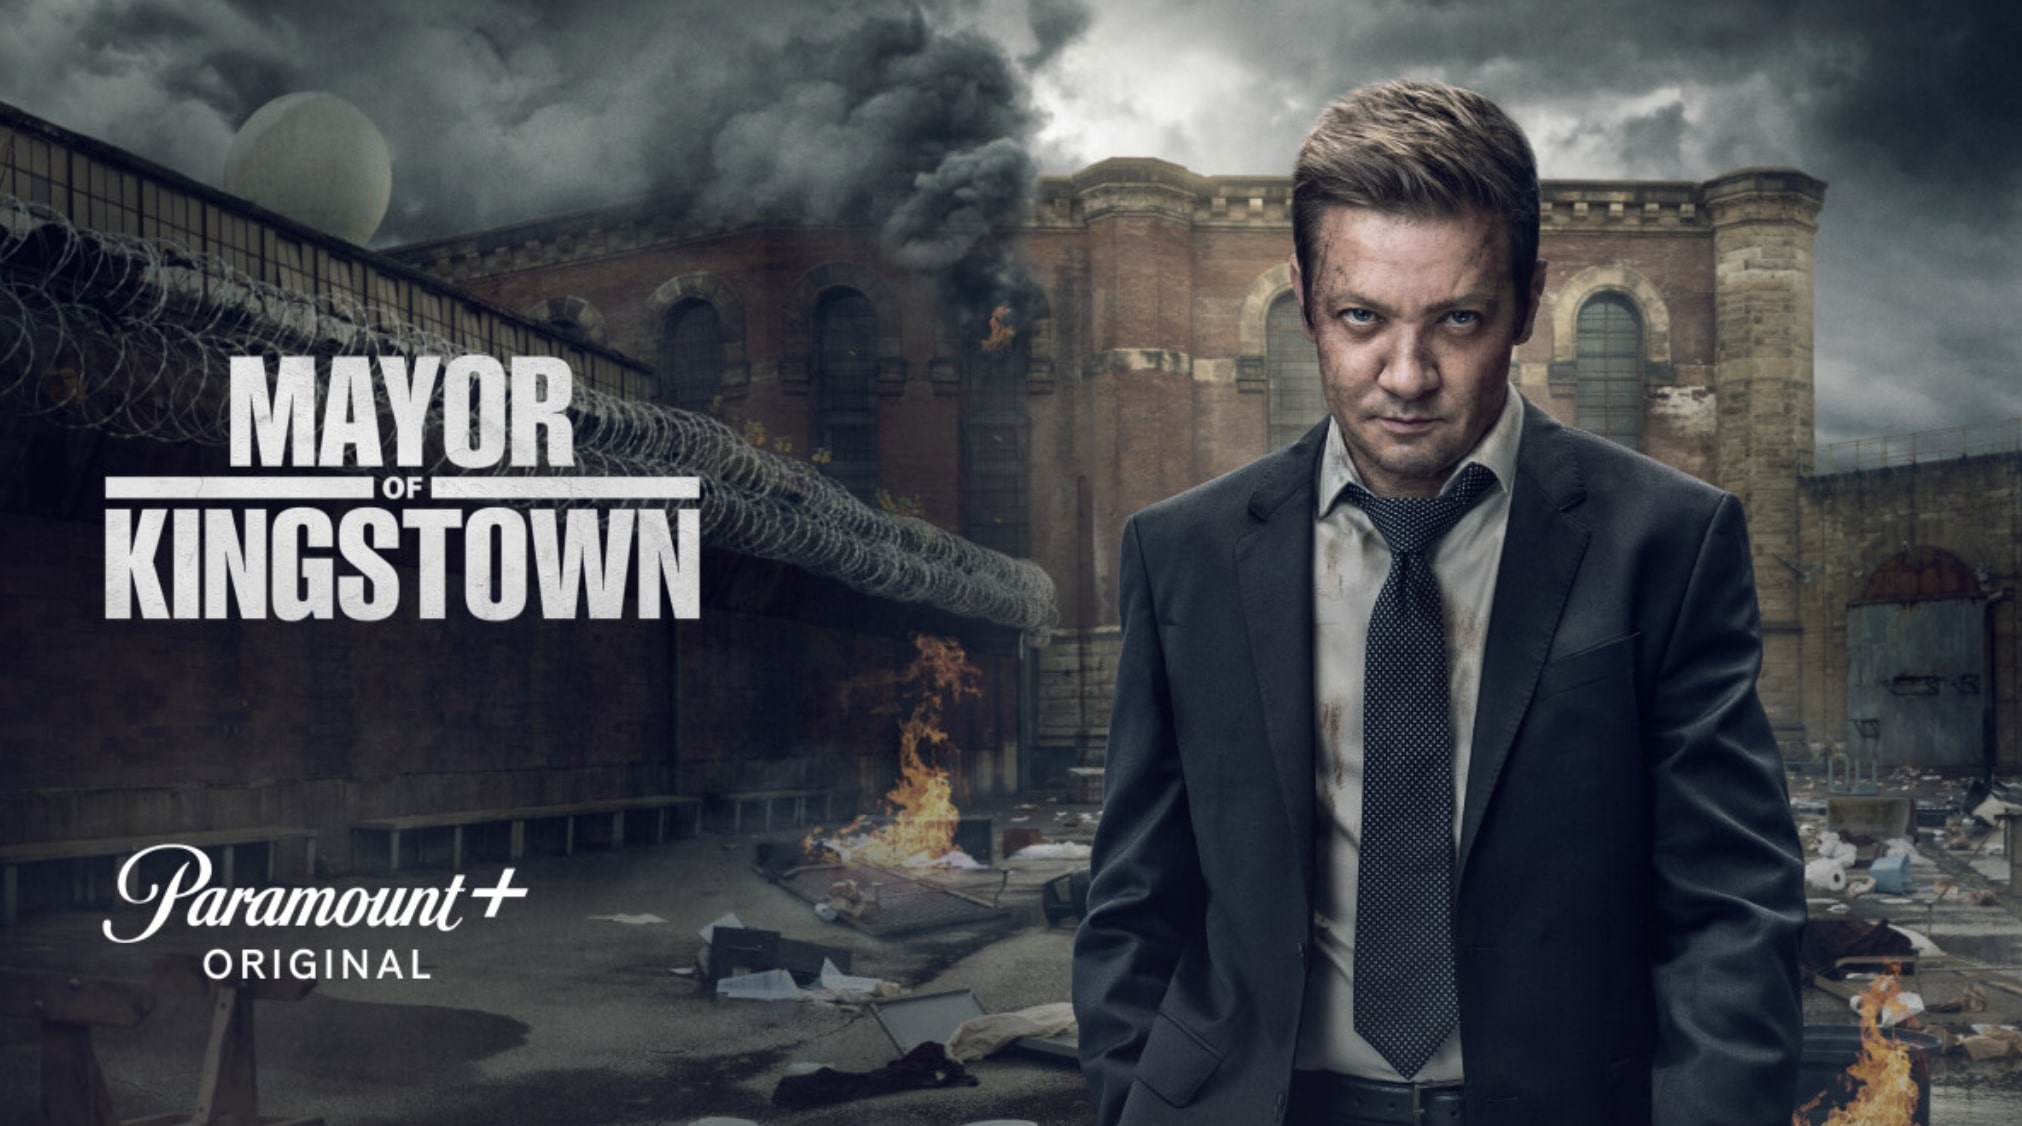 Mayor of Kingstown Season 2 arrives today on Paramount Plus, and here's